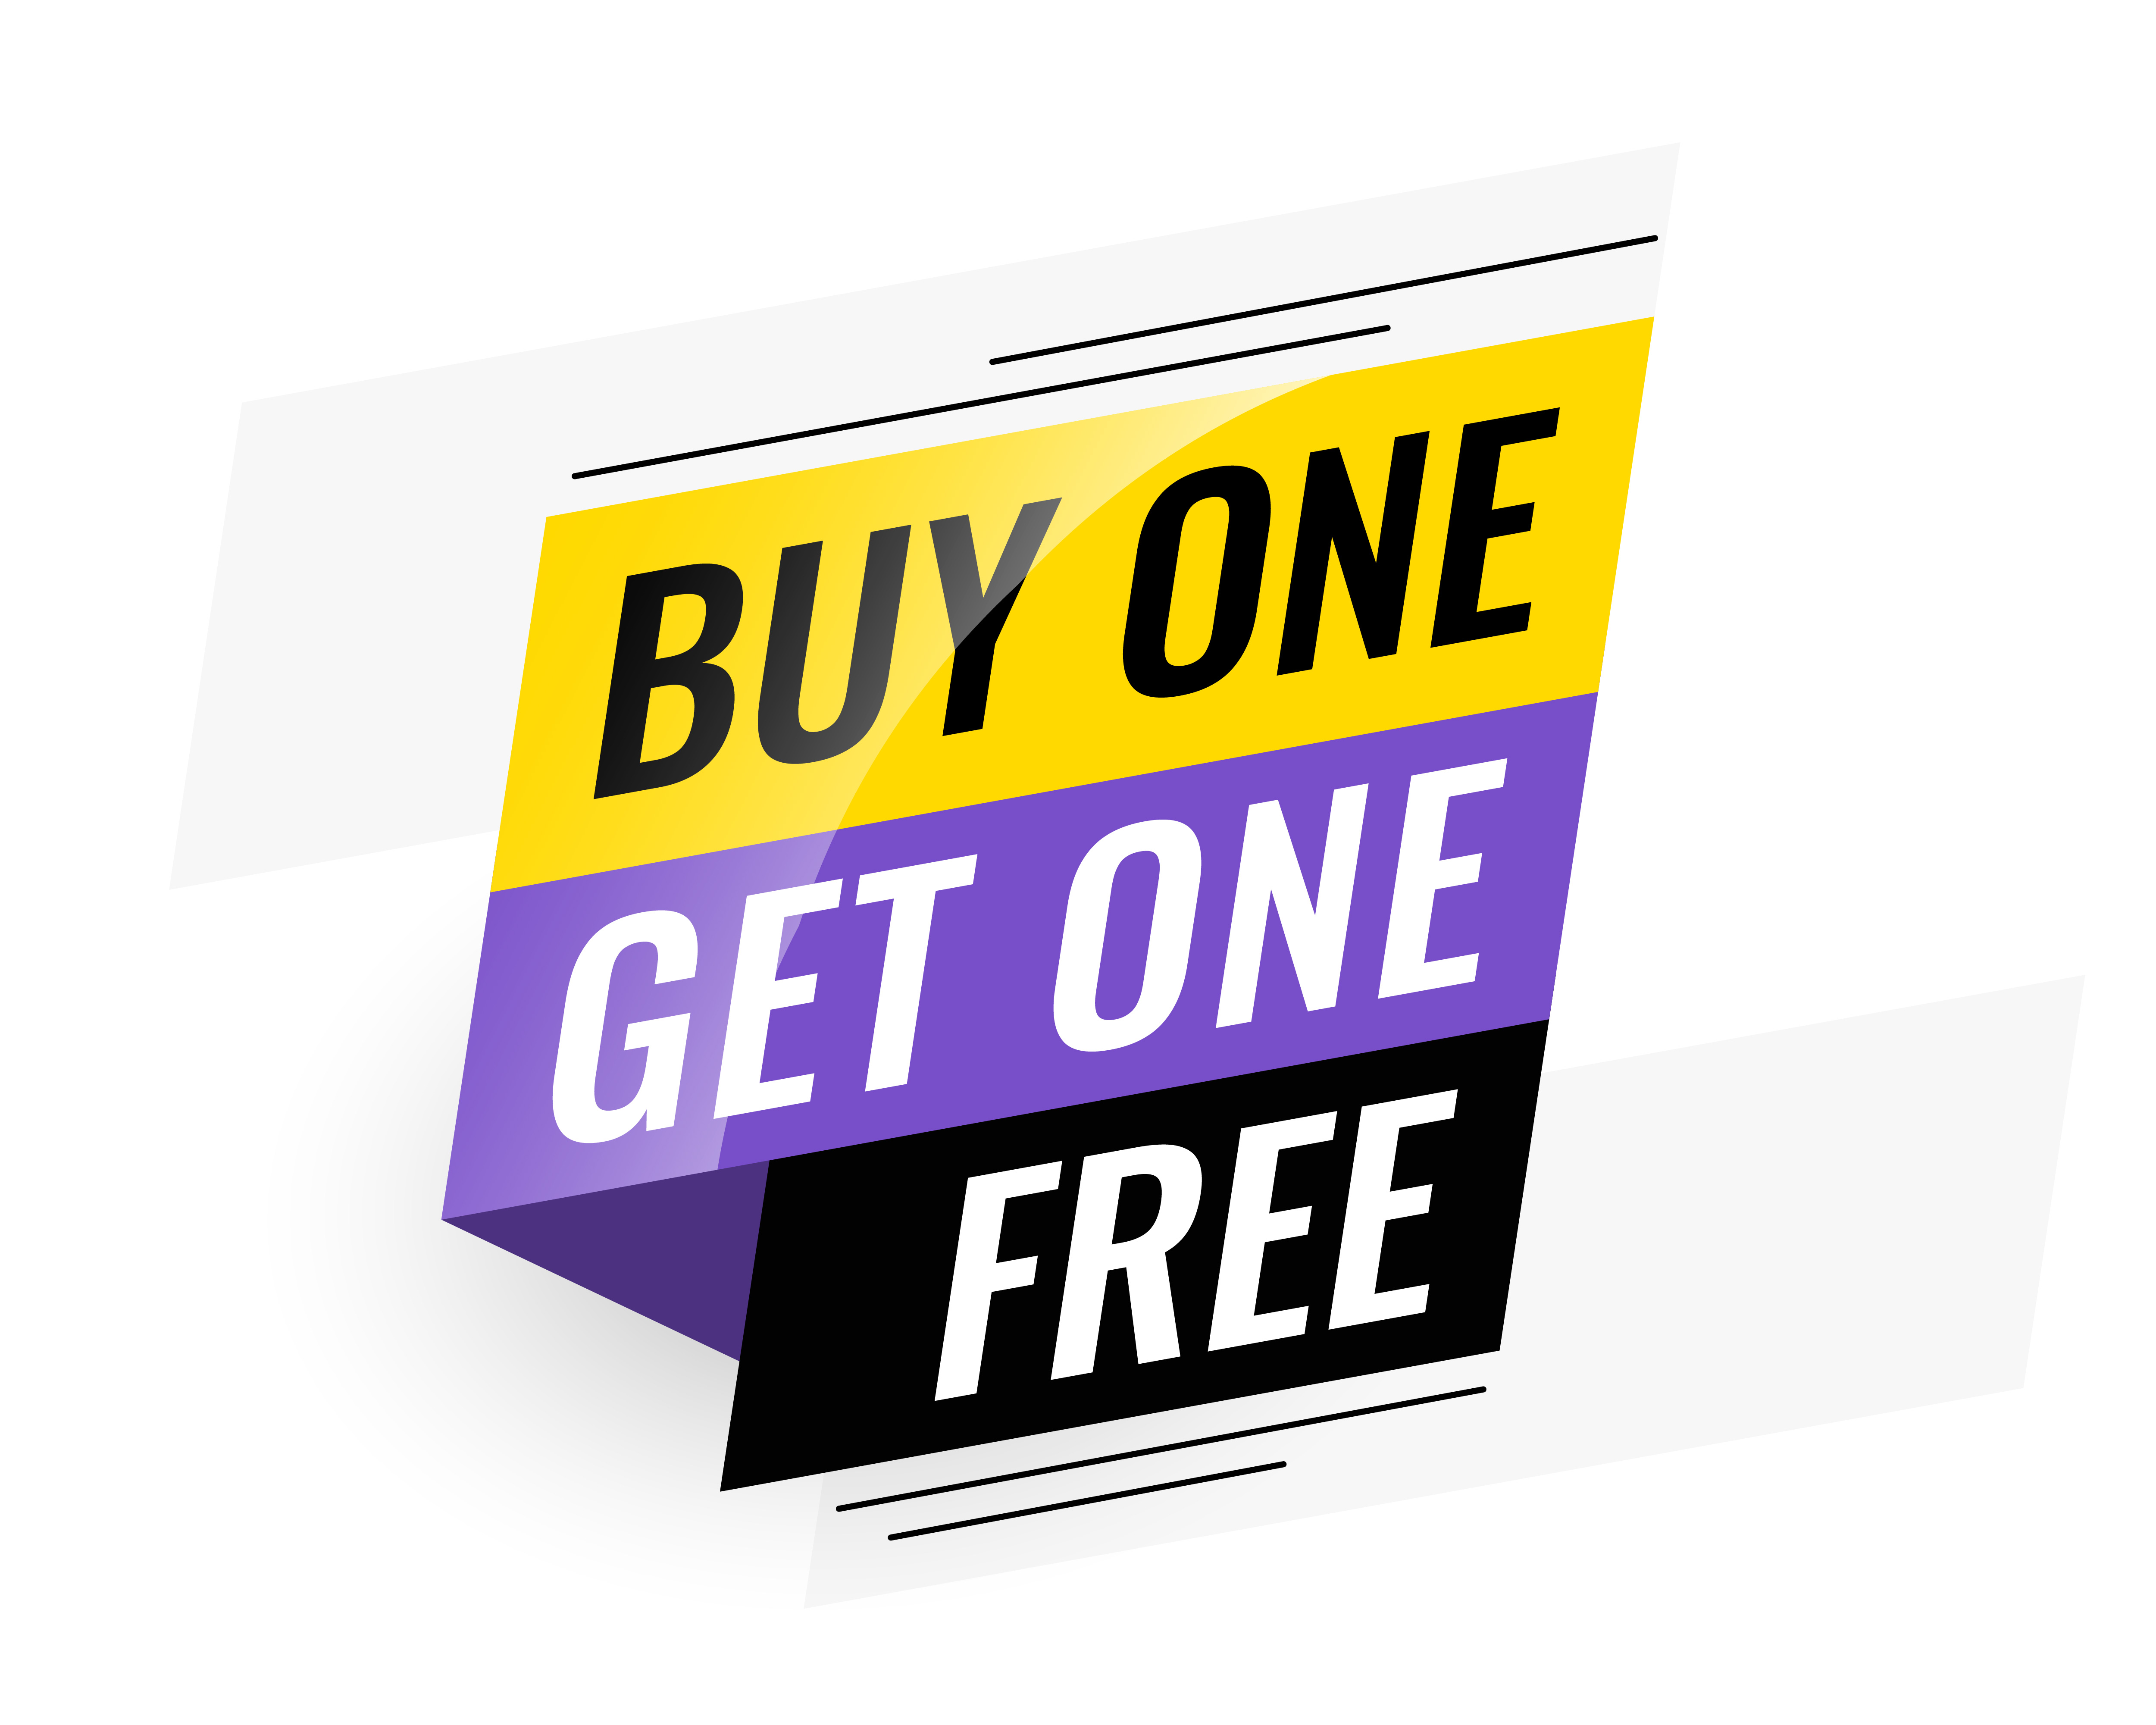 Buy One Get One Free - (16438 Free Downloads)